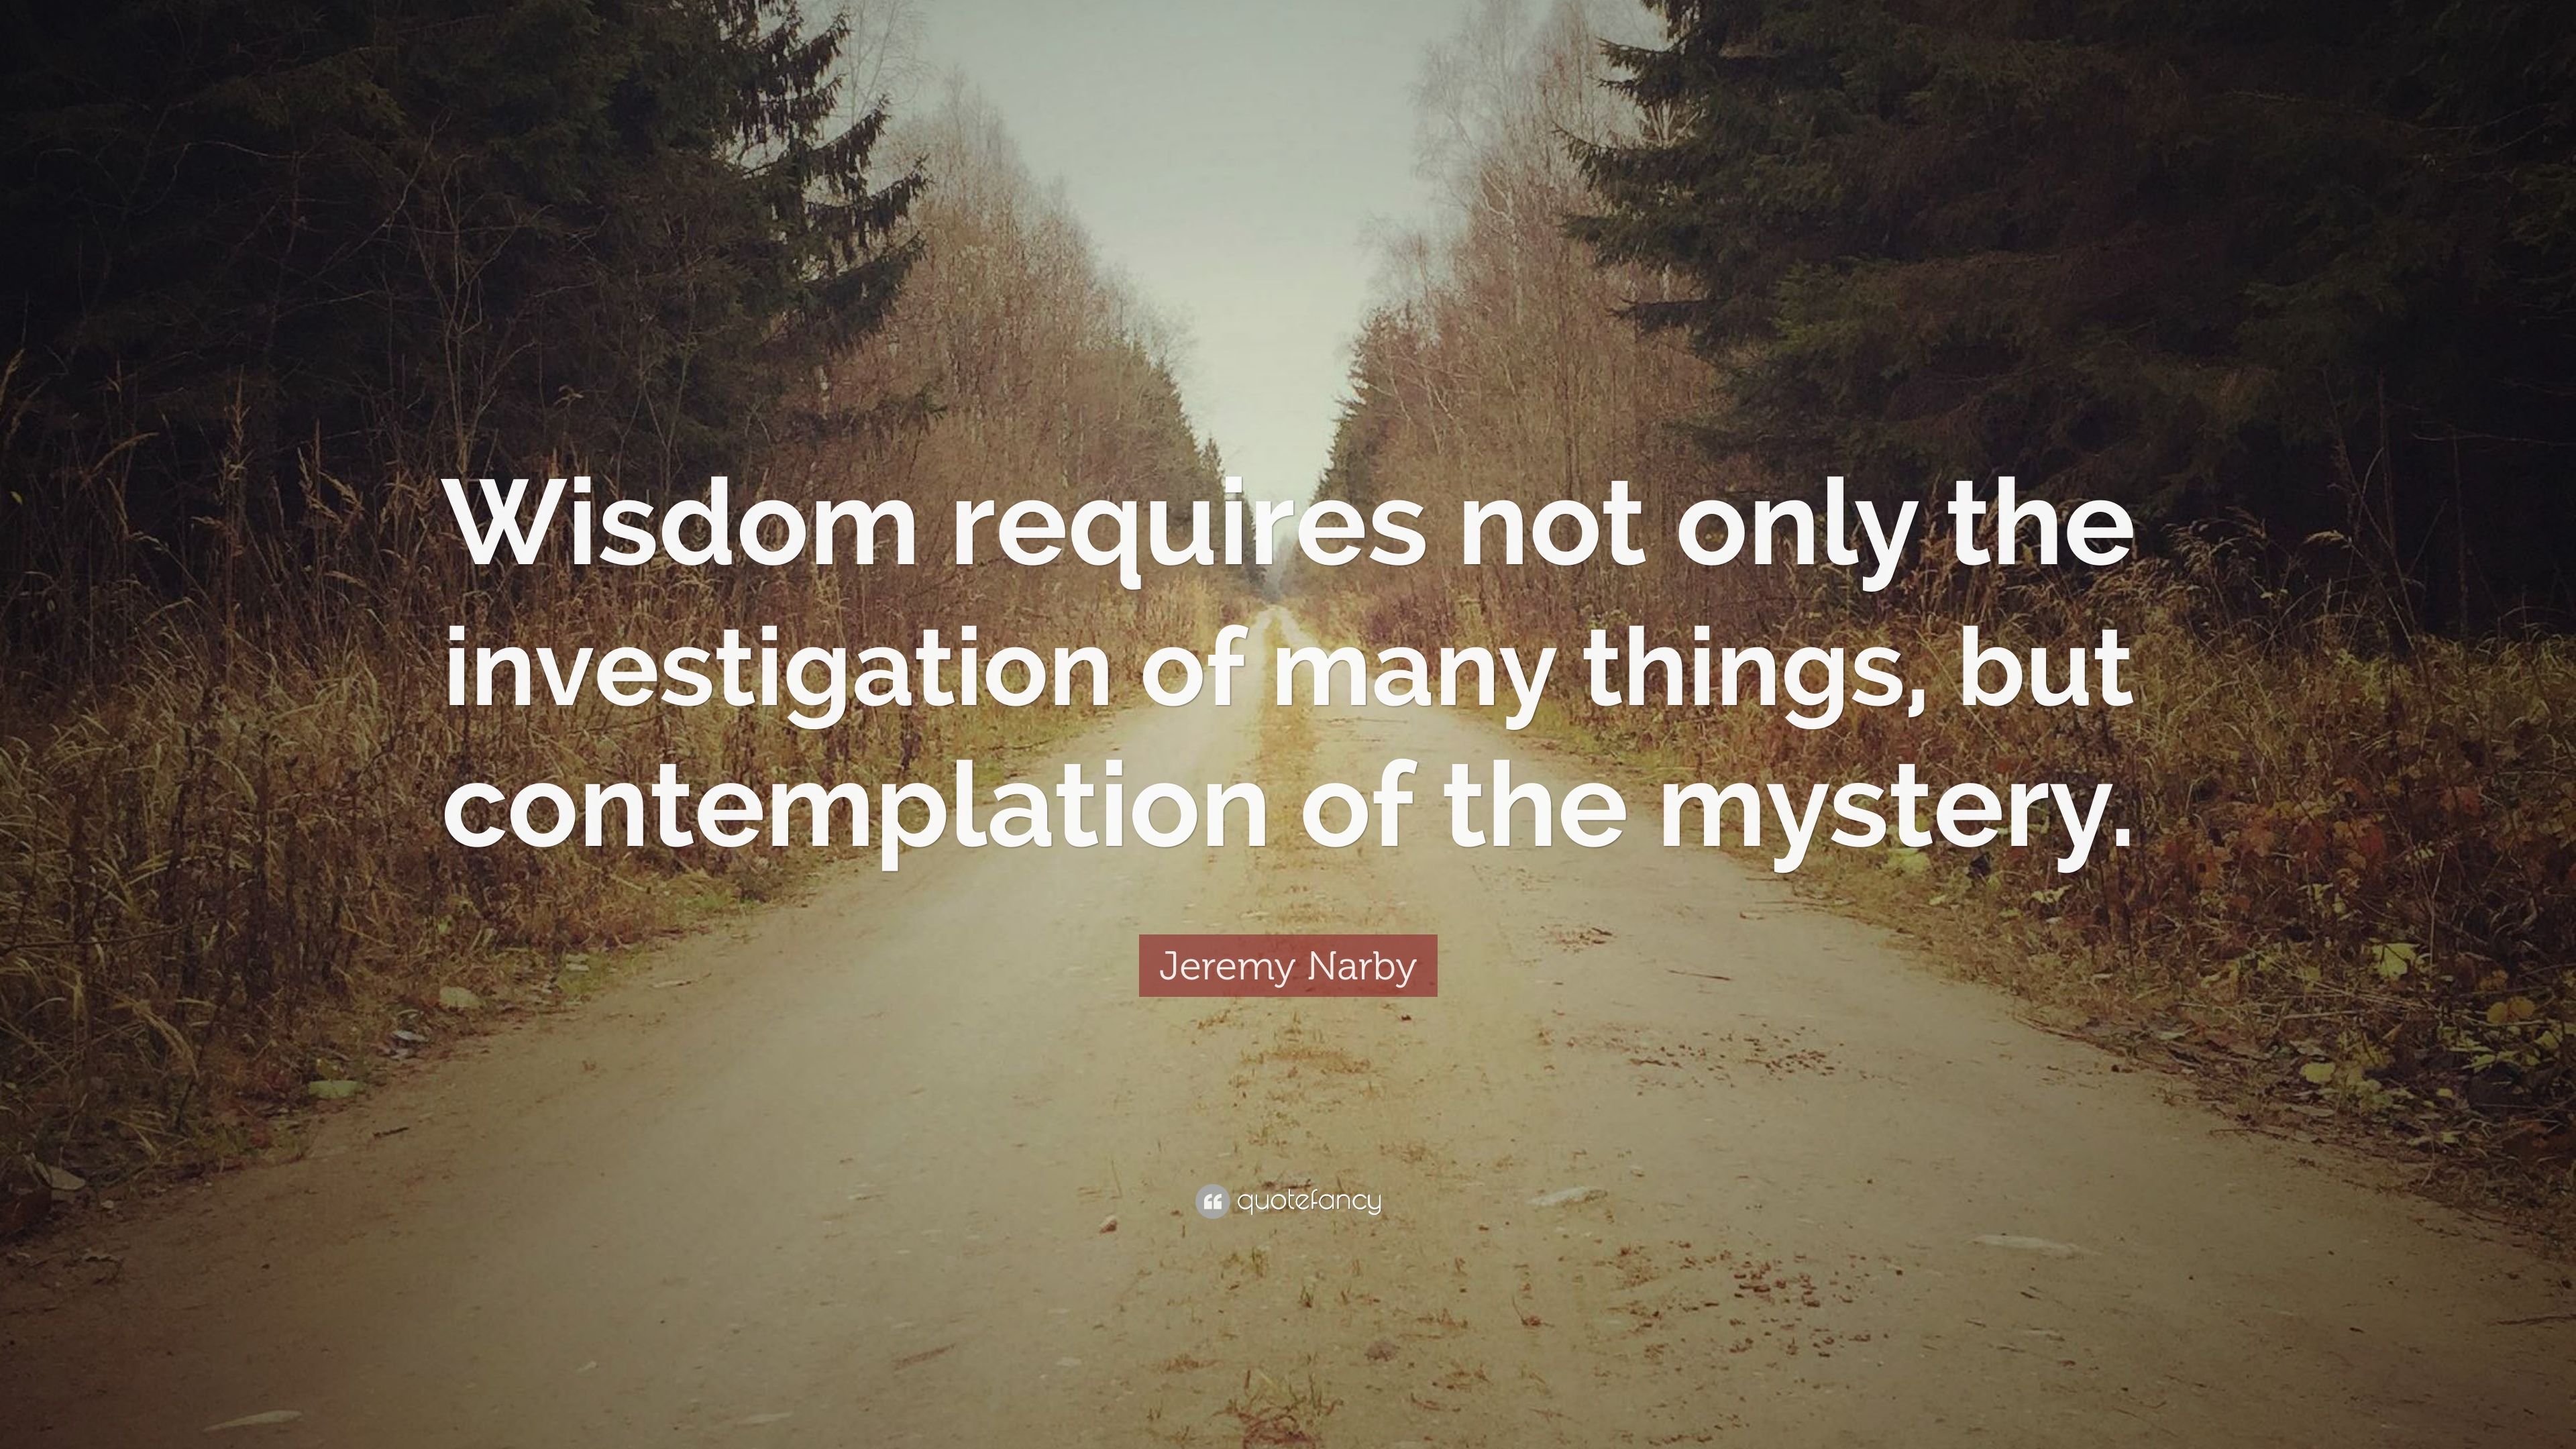 Jeremy Narby Quote: “Wisdom requires not only the investigation